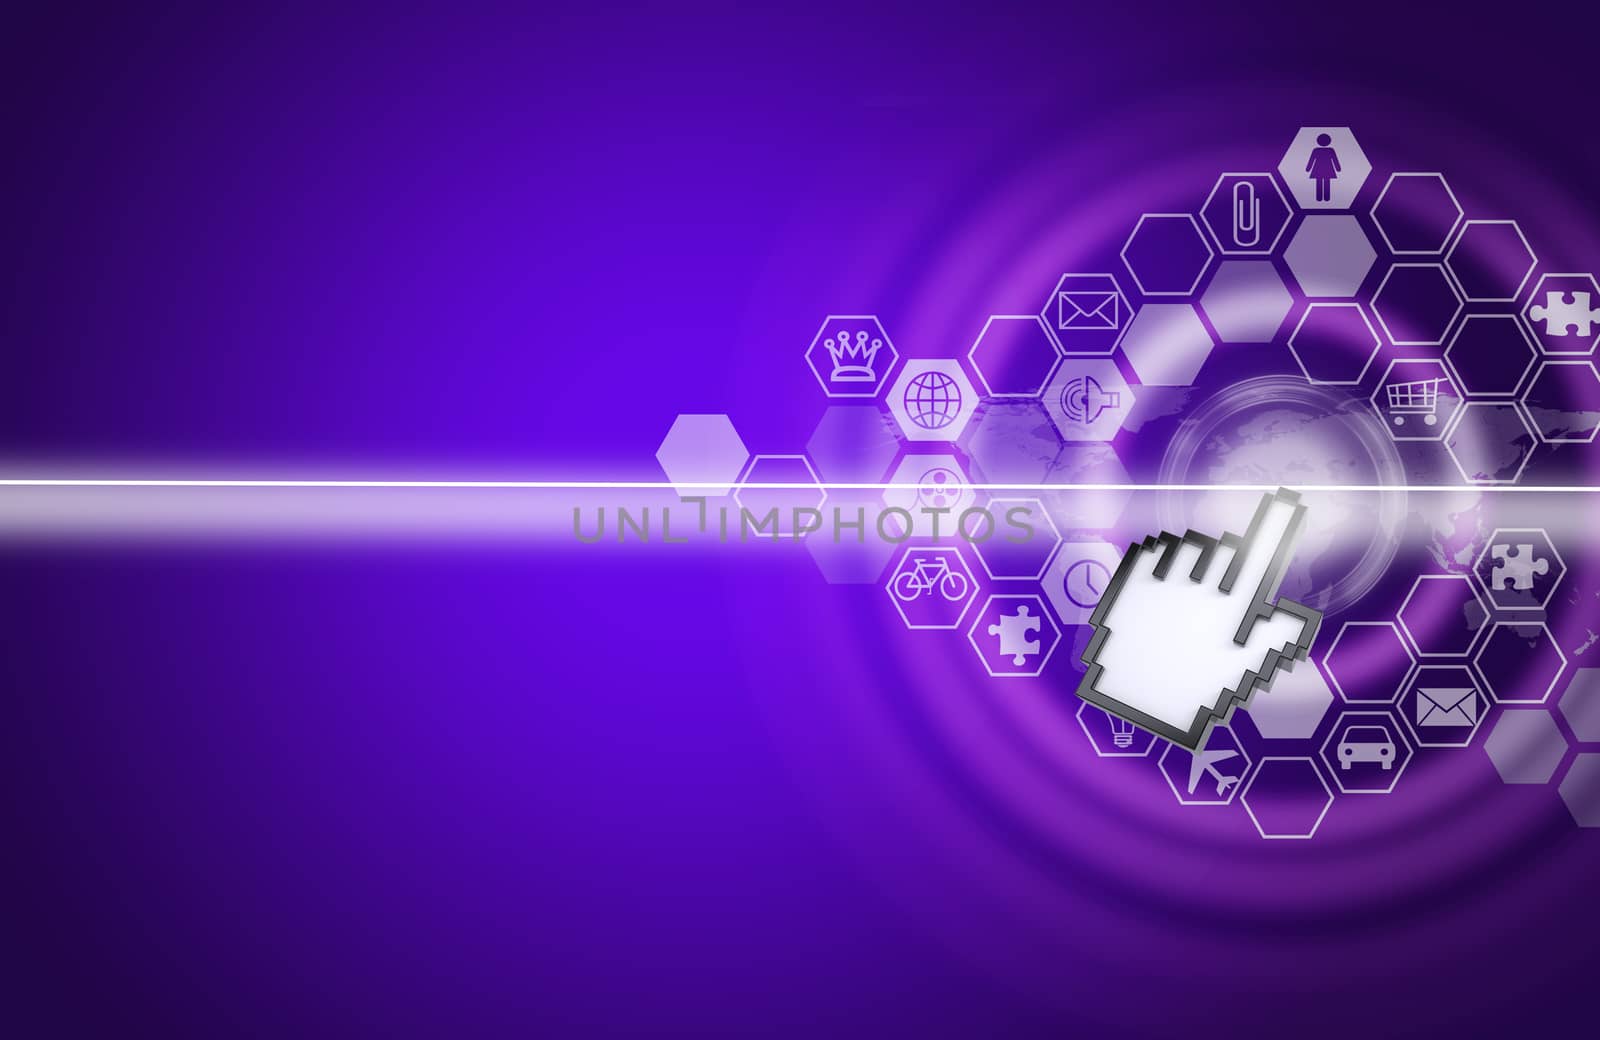 Cursor clicking on virtual purple screen on abstract background with signs